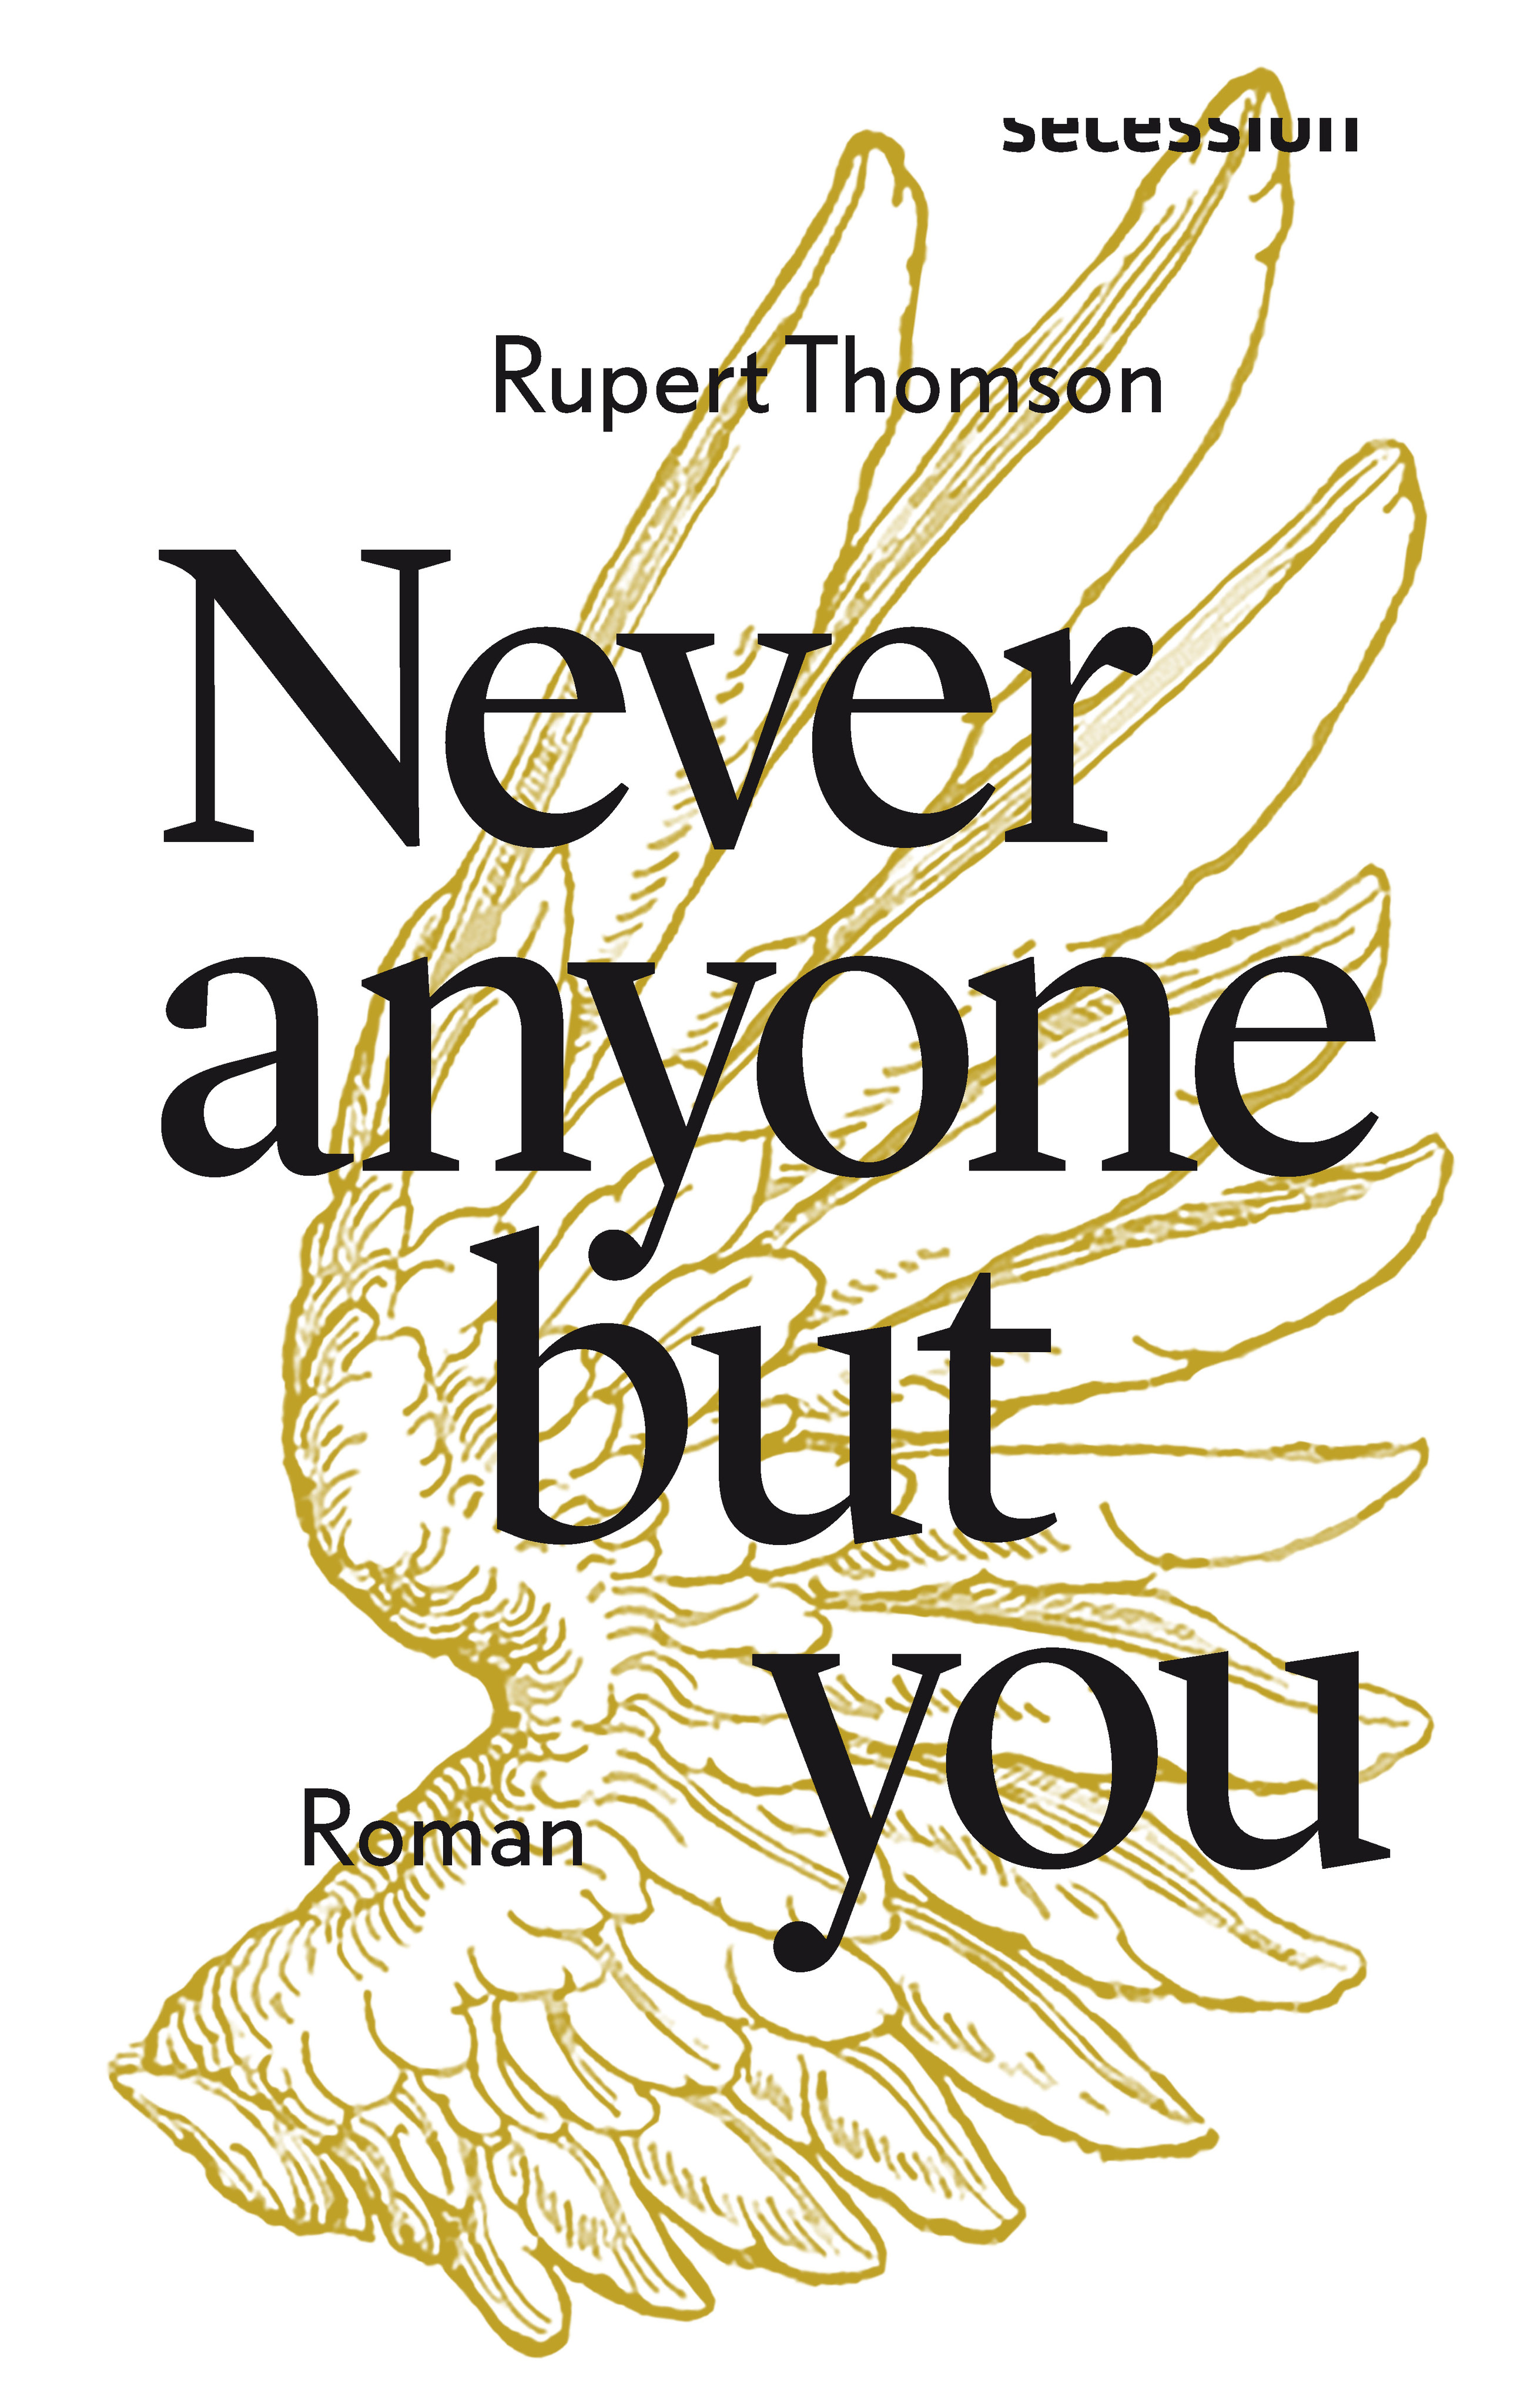 Buchcover: Rupert Thomson: Never anyone but you